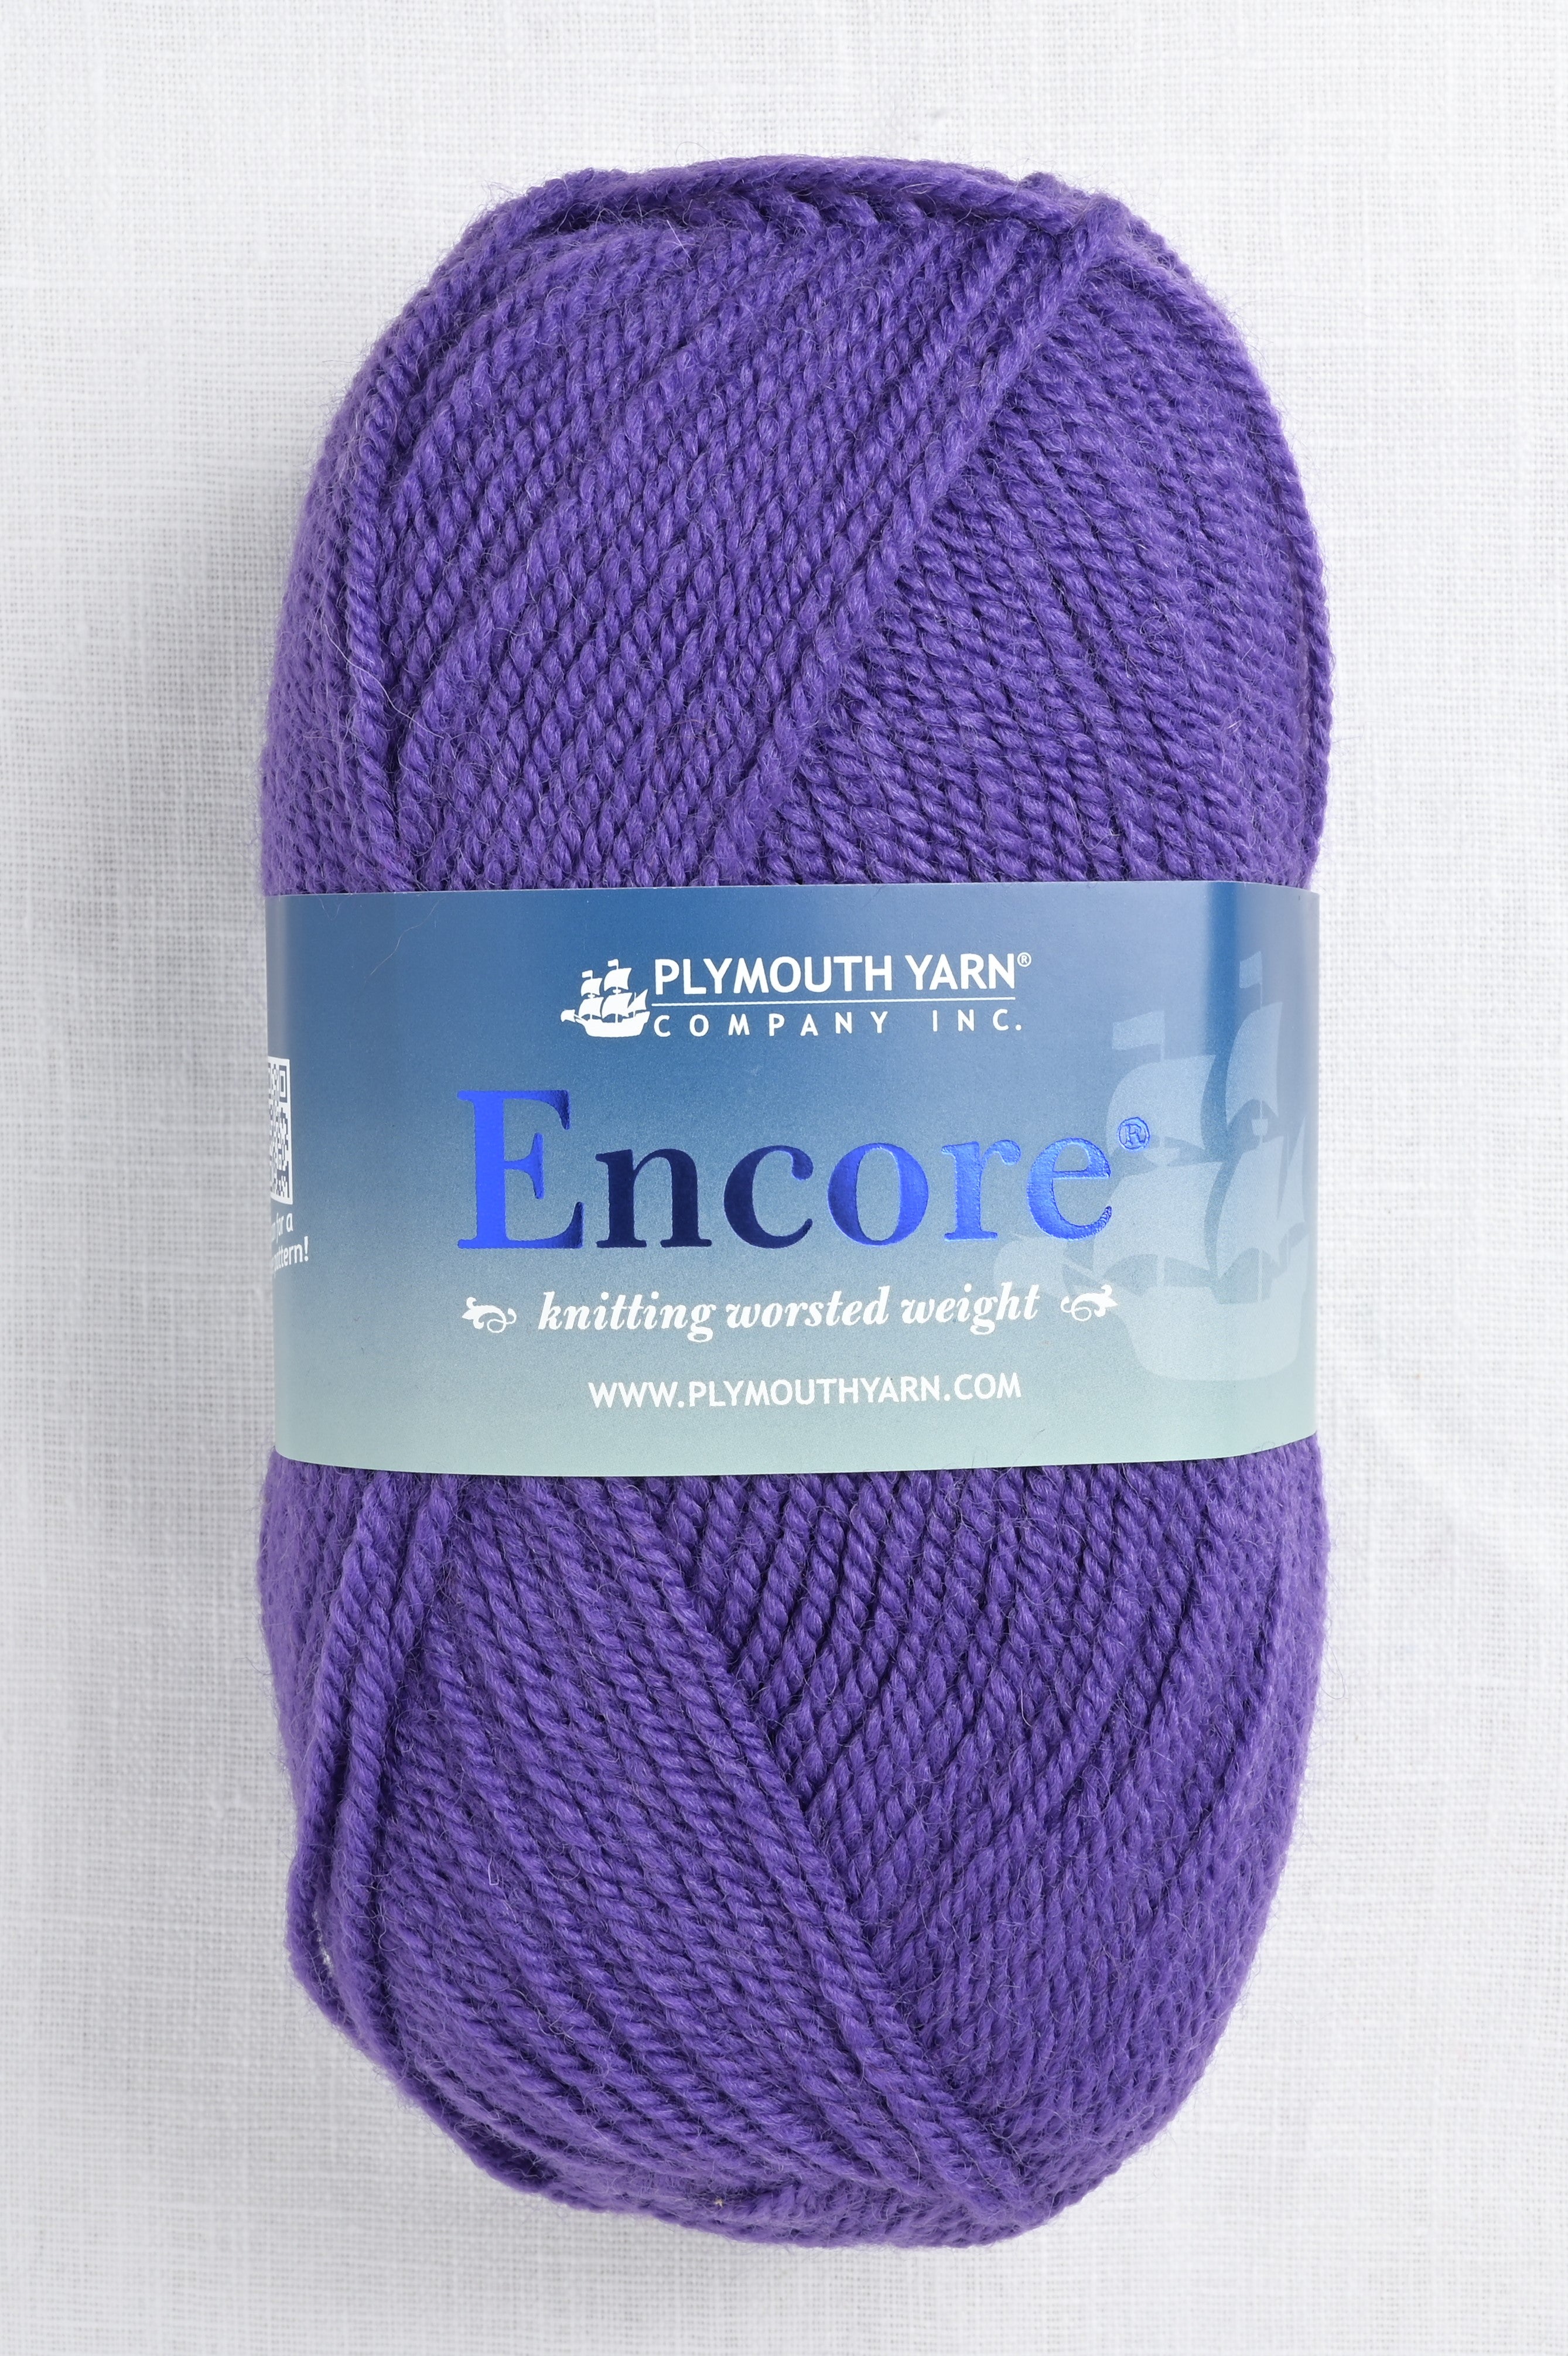 The Little Yarn Store - More products have been added to the Clearance Sale!  All Scheepjes yarns an kits have been reduced further! #yarngloriousyarn # clearancesale #yarnsale #brisbaneyarnshop #shoplocal #crocheters #knitters  #scheepjes